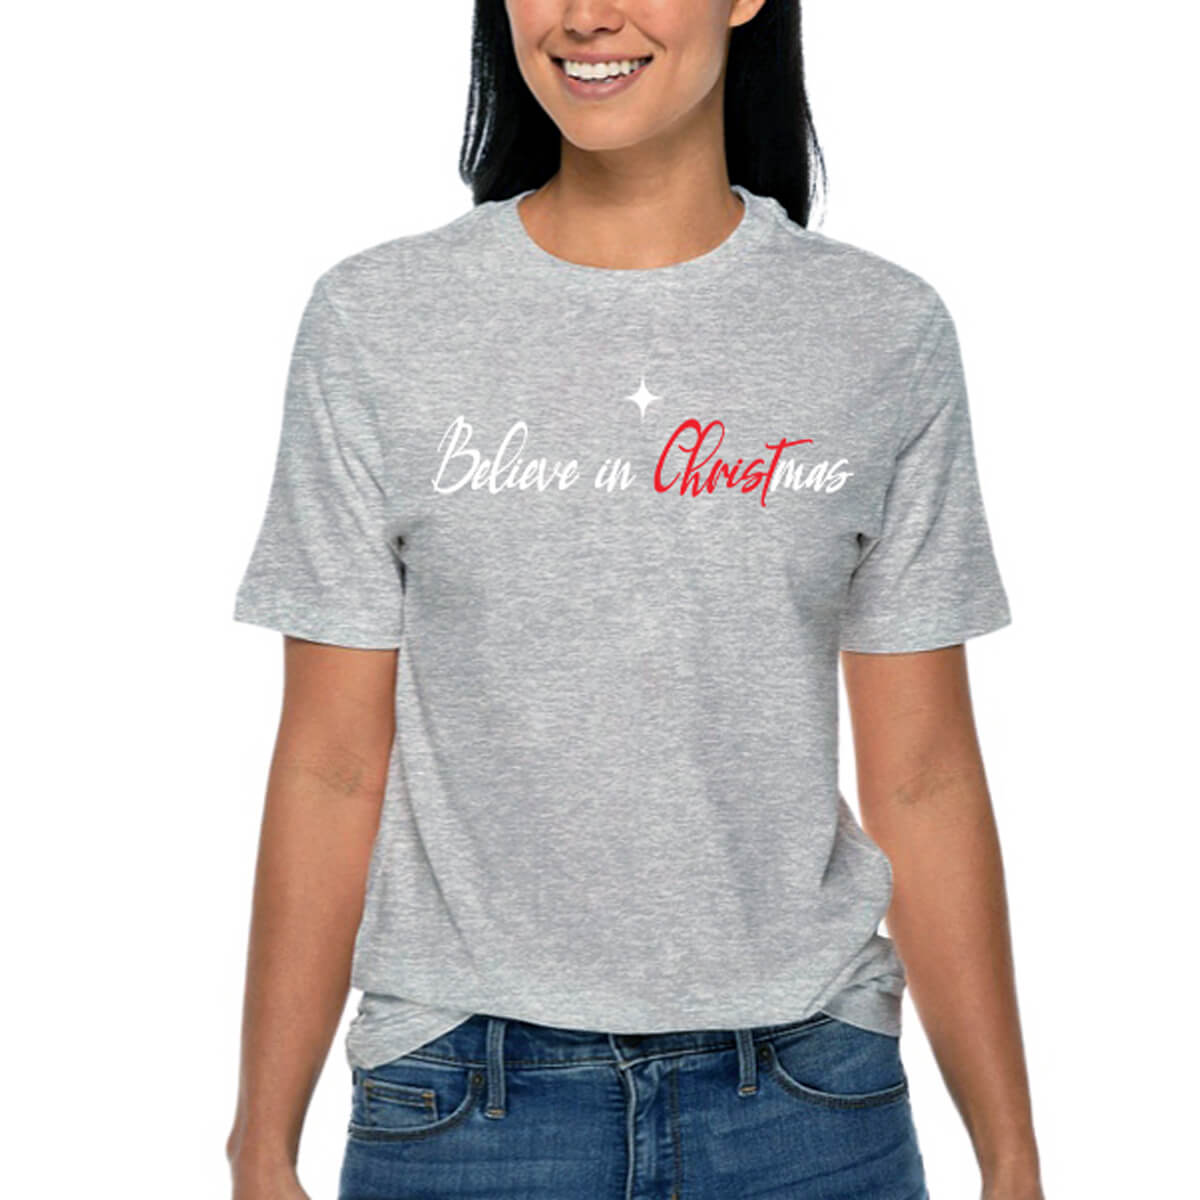 Believe In Christmas T-Shirt